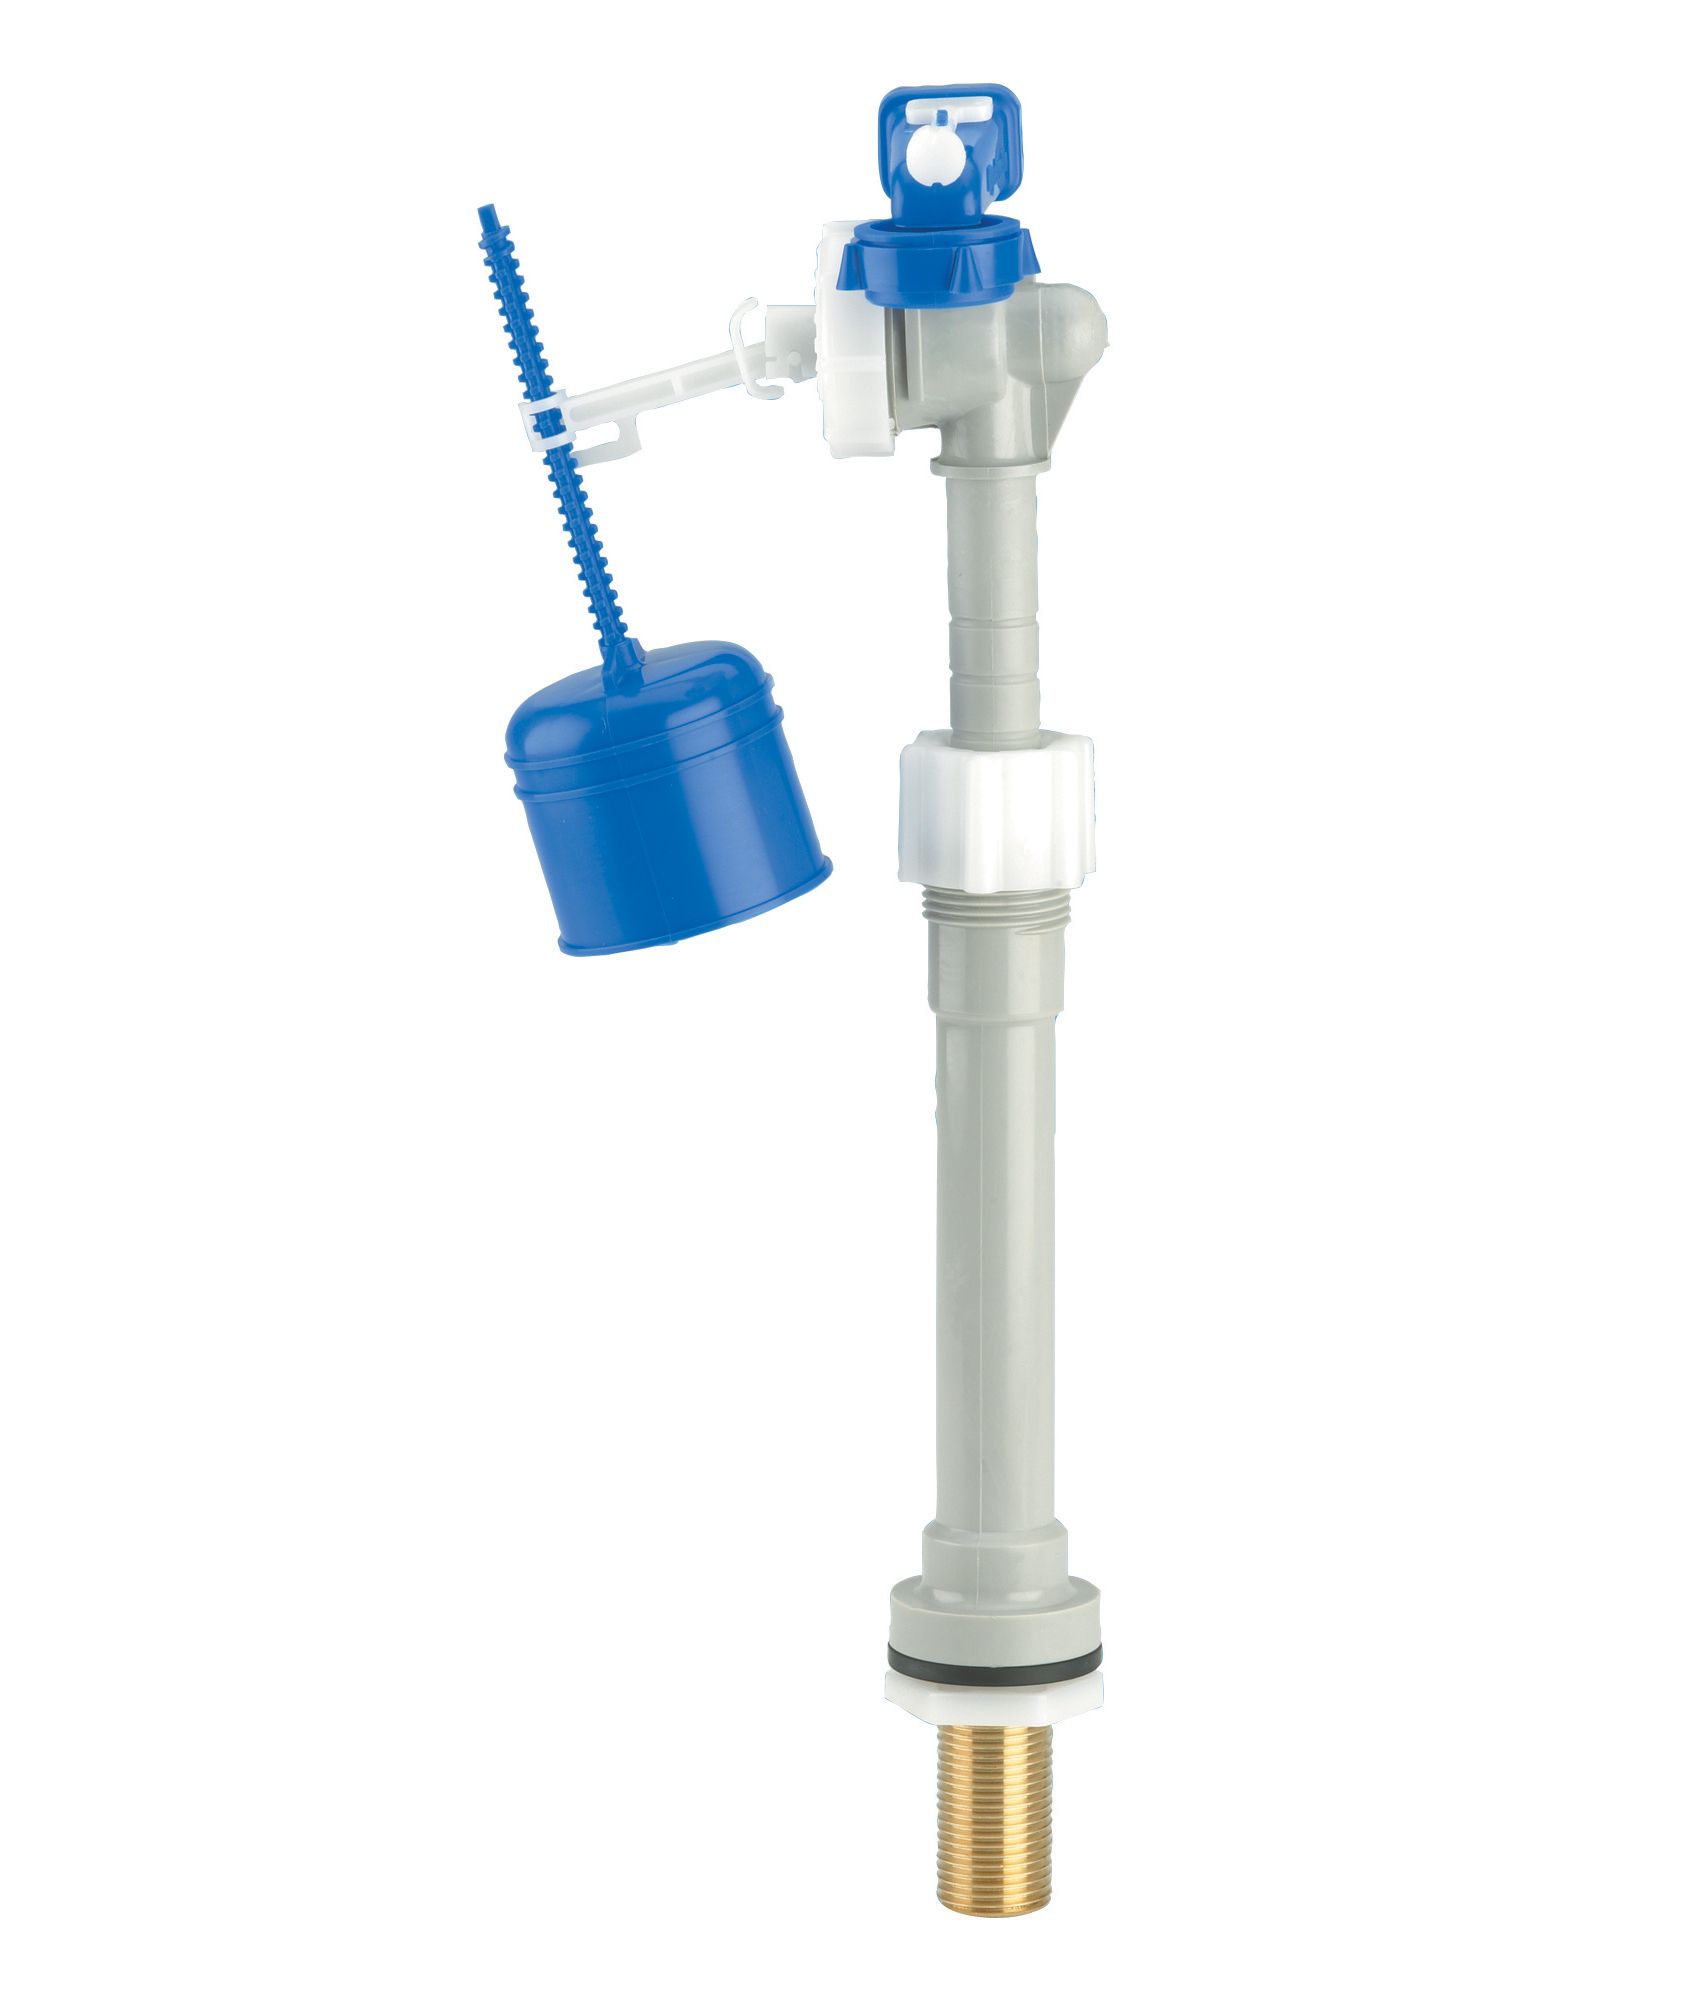 Dudley Adjustable Inlet Valve with Brass Tail